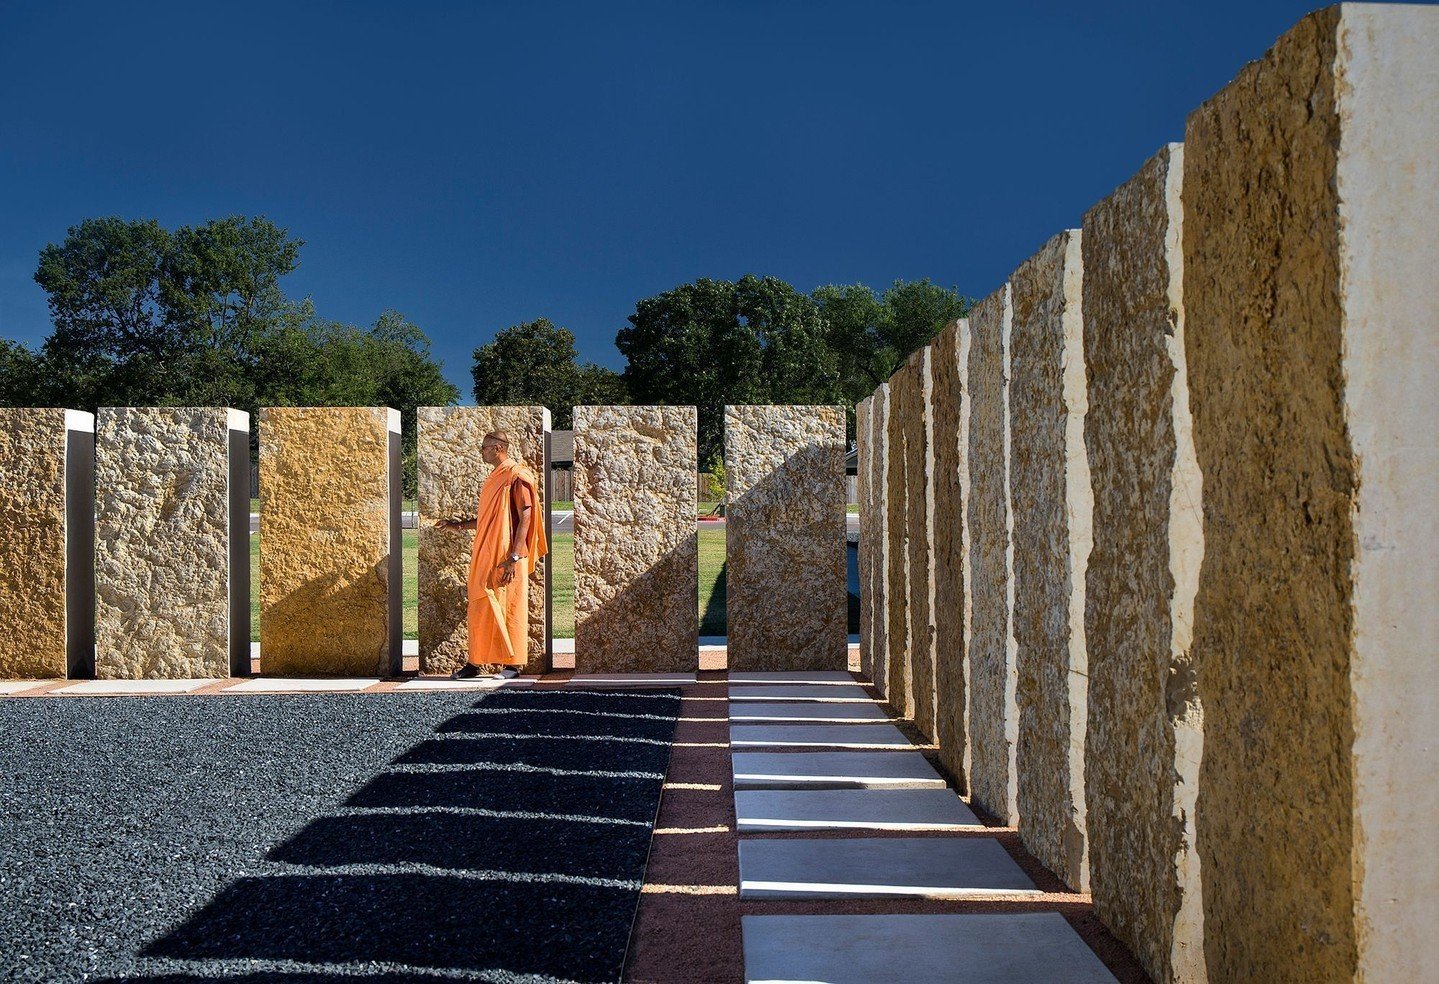 Surrounding the temple, a perimeter of rough-cut stones obscures the view beyond when worshippers are seated inside, focusing their attention back inward and encouraging meditation and introspection. #ChinmayaMissionAustin #MiroRiveraArchitects #MRAP